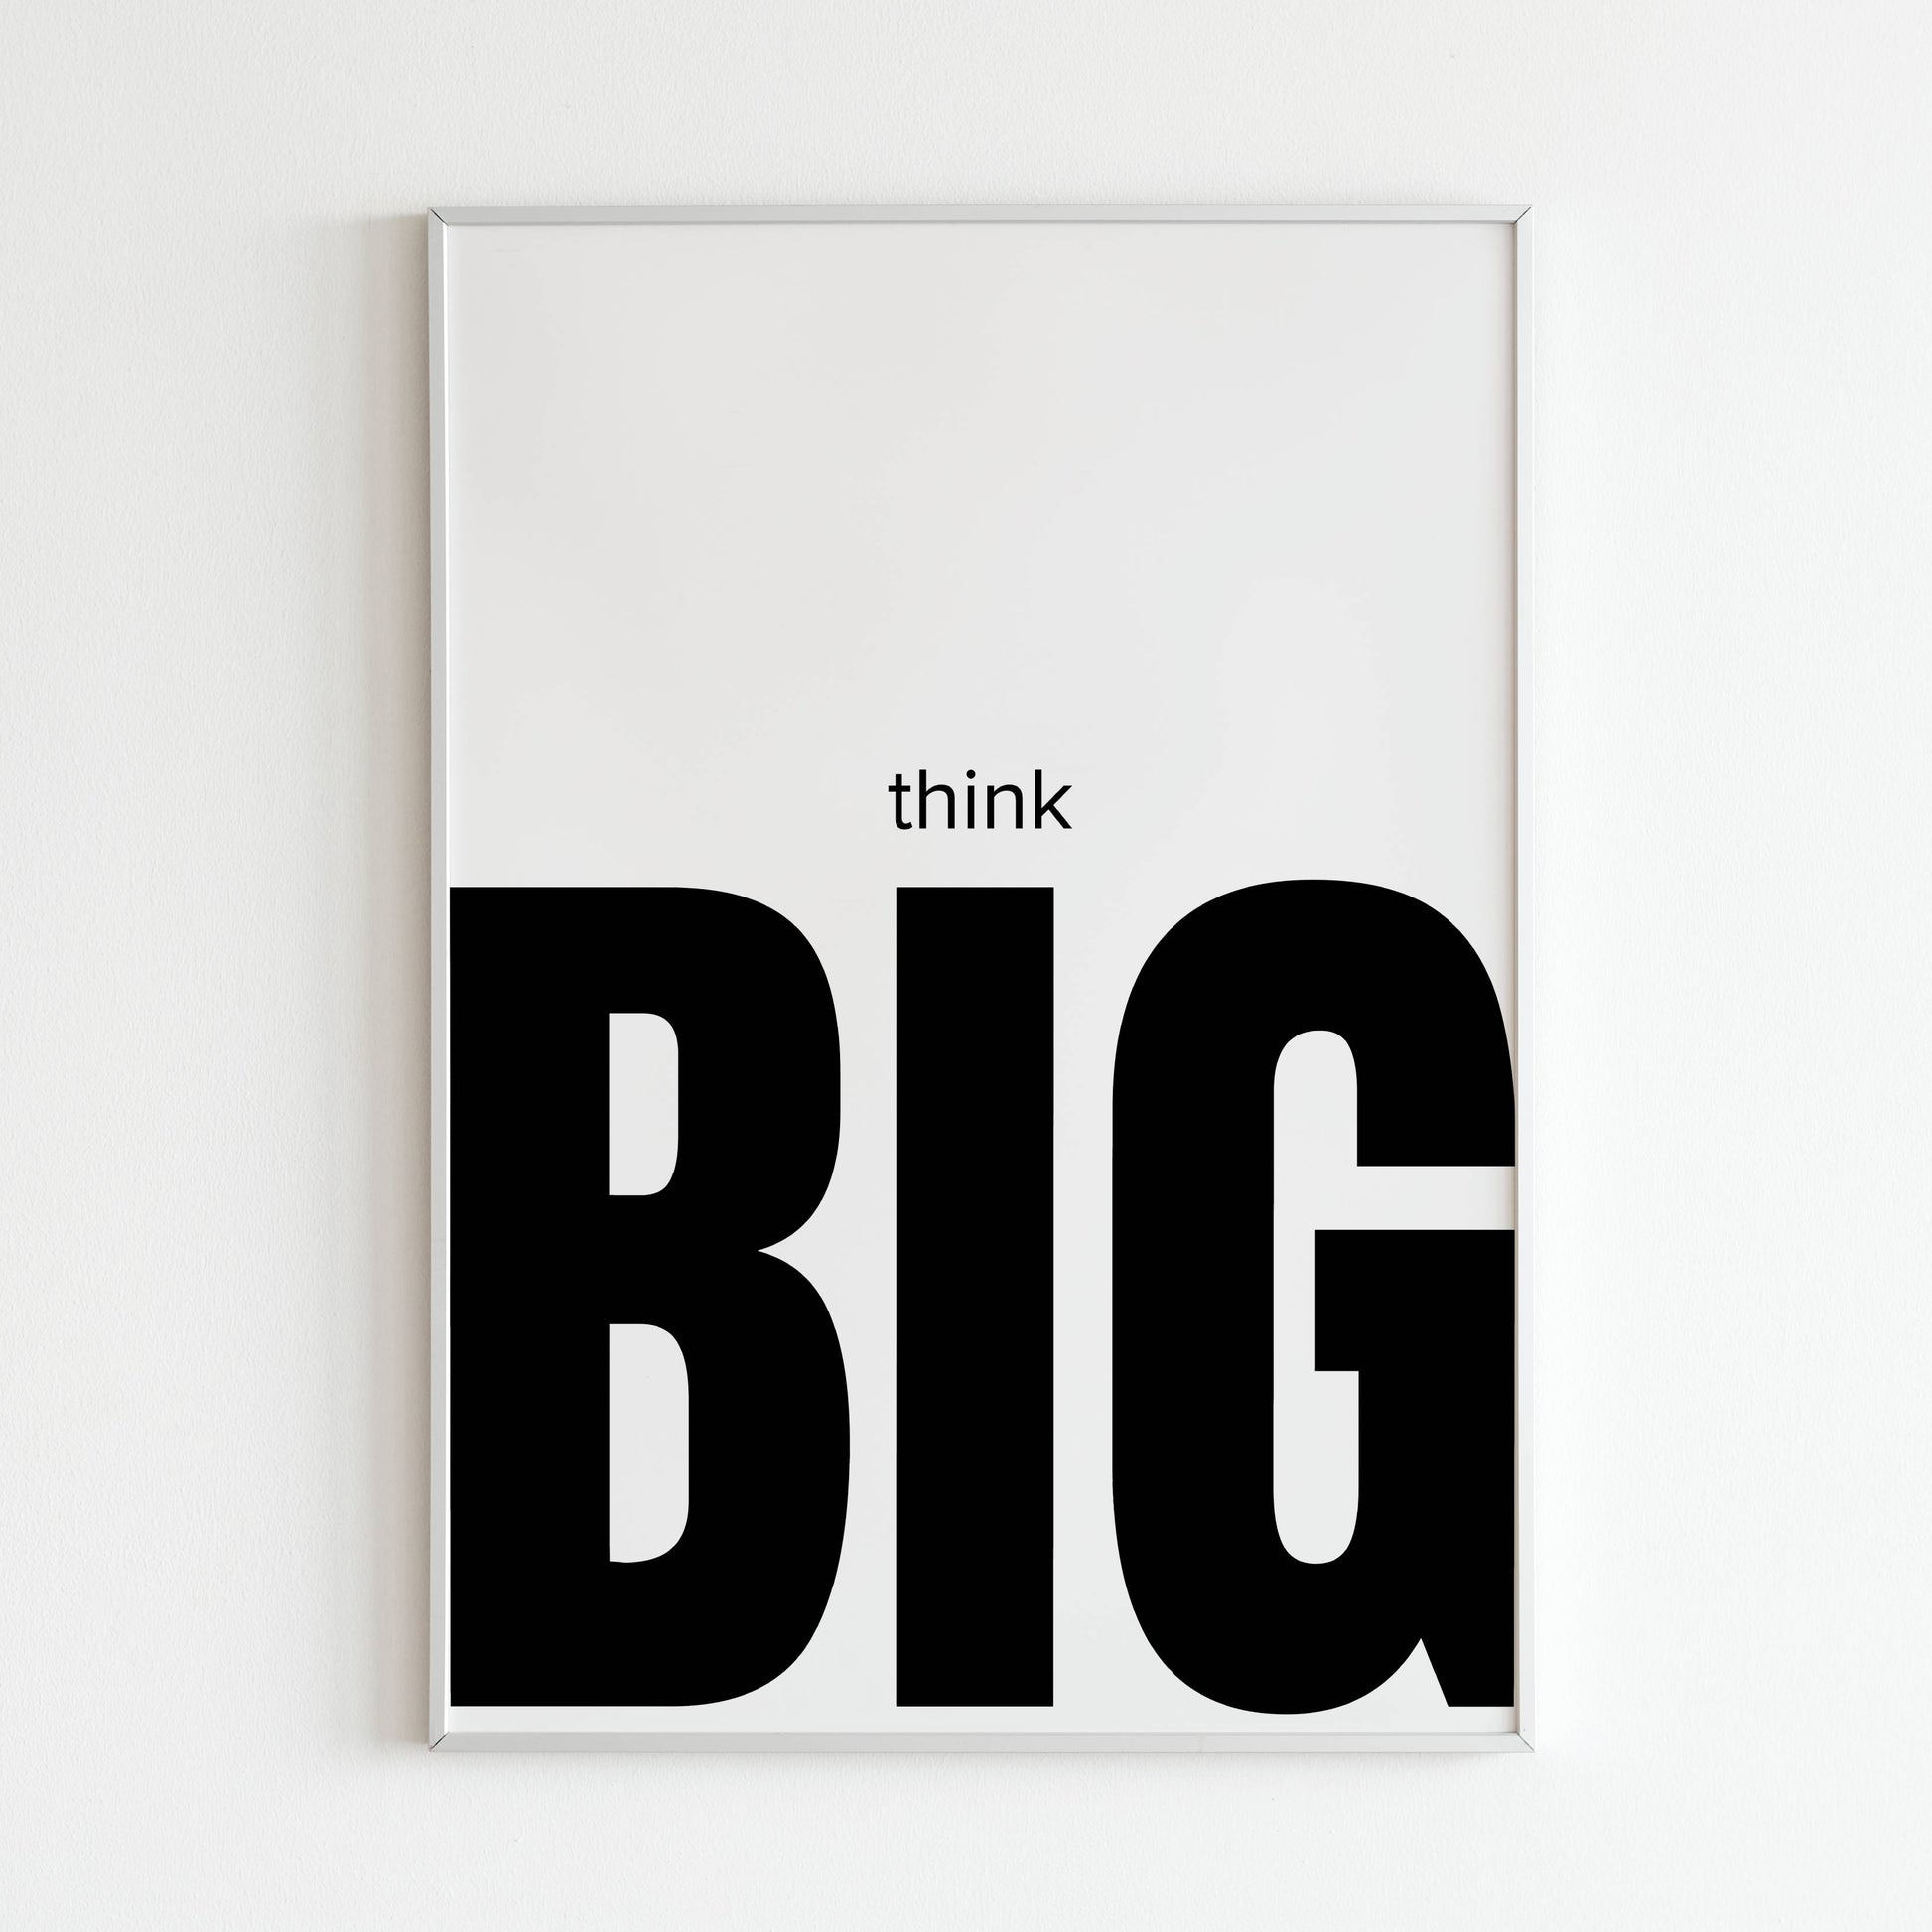 Downloadable "Think big" wall art to encourage ambition.